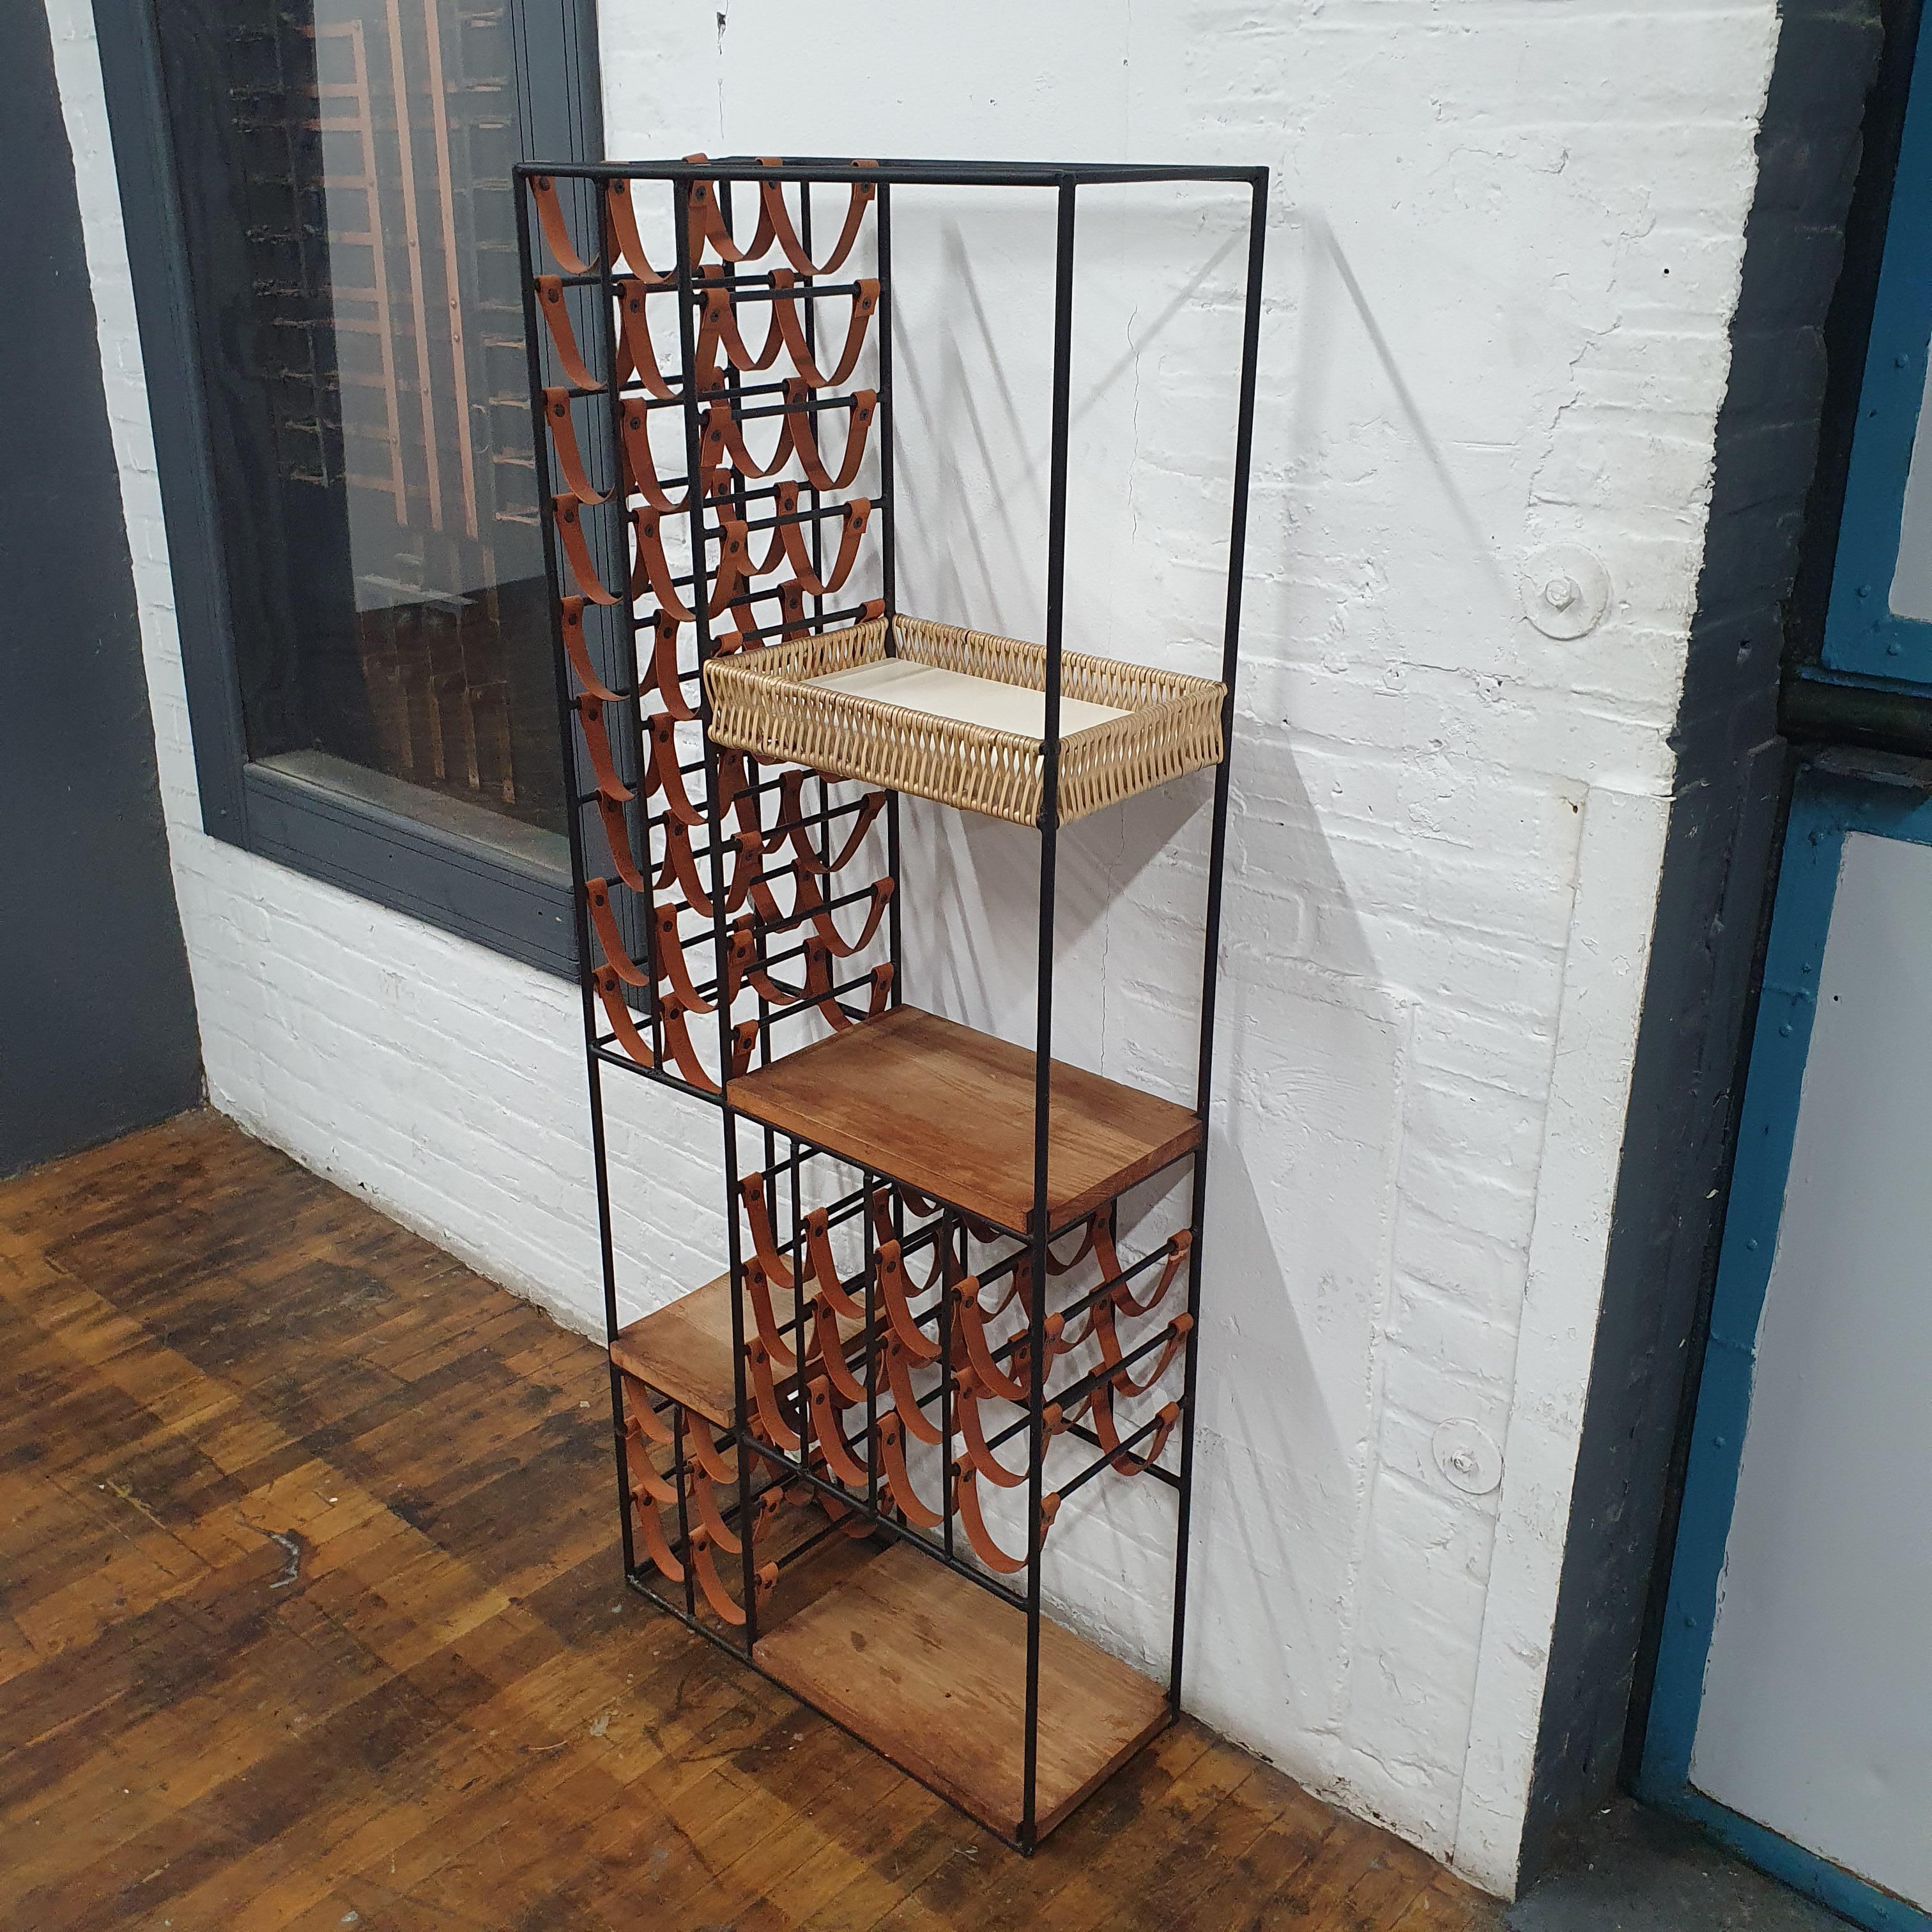 Arthur Umanoff for Shaver Howard Iron and leather wine rack. the leather straps can hold 40 bottles. has three wood butcher block shelves and a wicker basket shelf. can serve as a room divider as well. its finished on all sides.